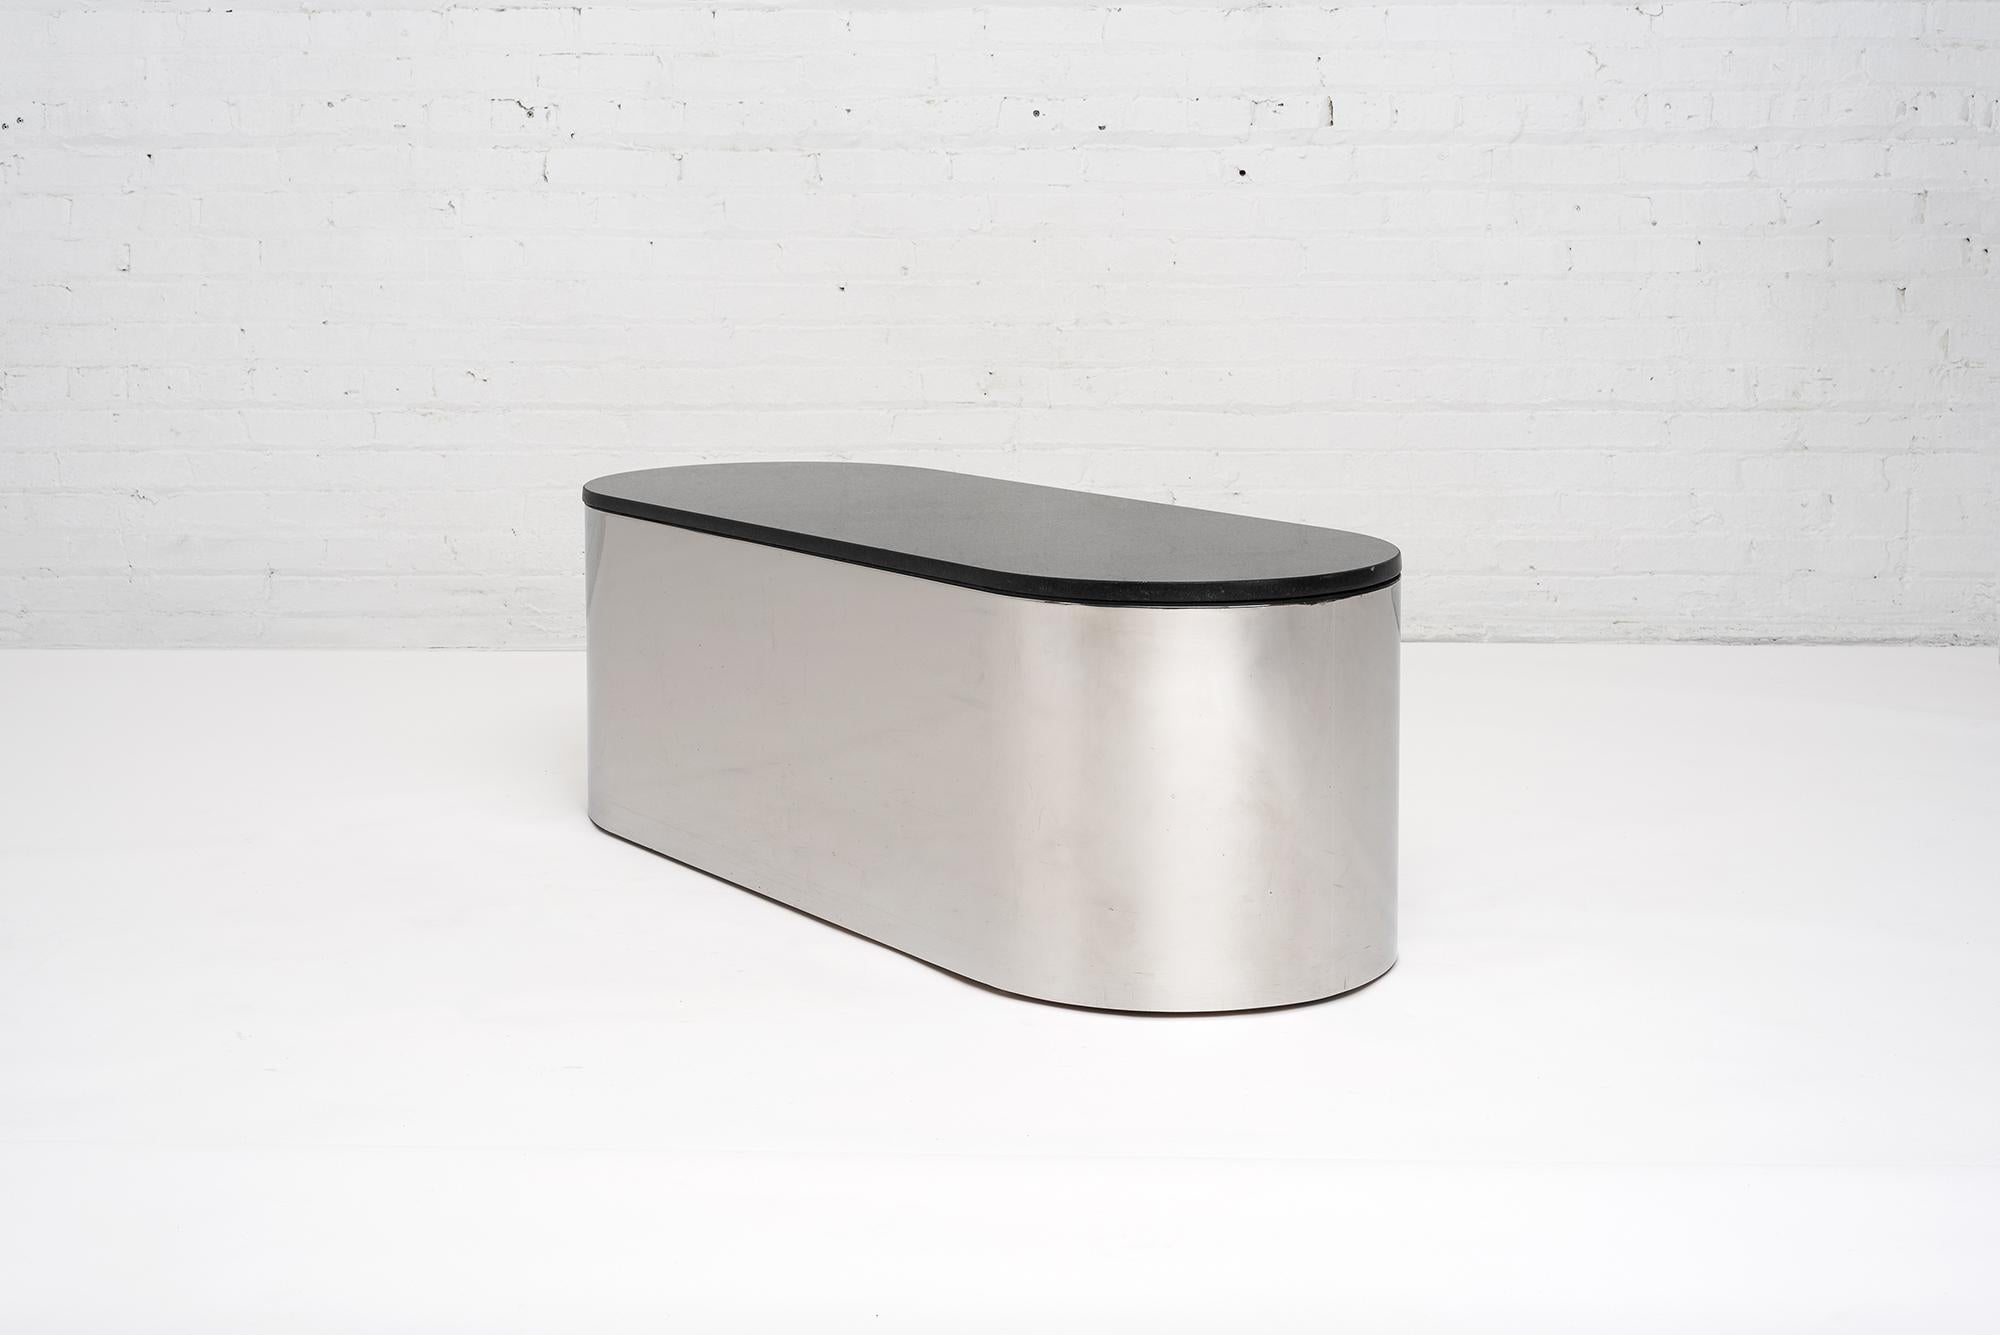 Brueton stainless steel and black granite coffee table, circa 1970s. Heavy stainless steel construction which Brueton is known for with 3/4” thick black granite. Polished chrome finish.